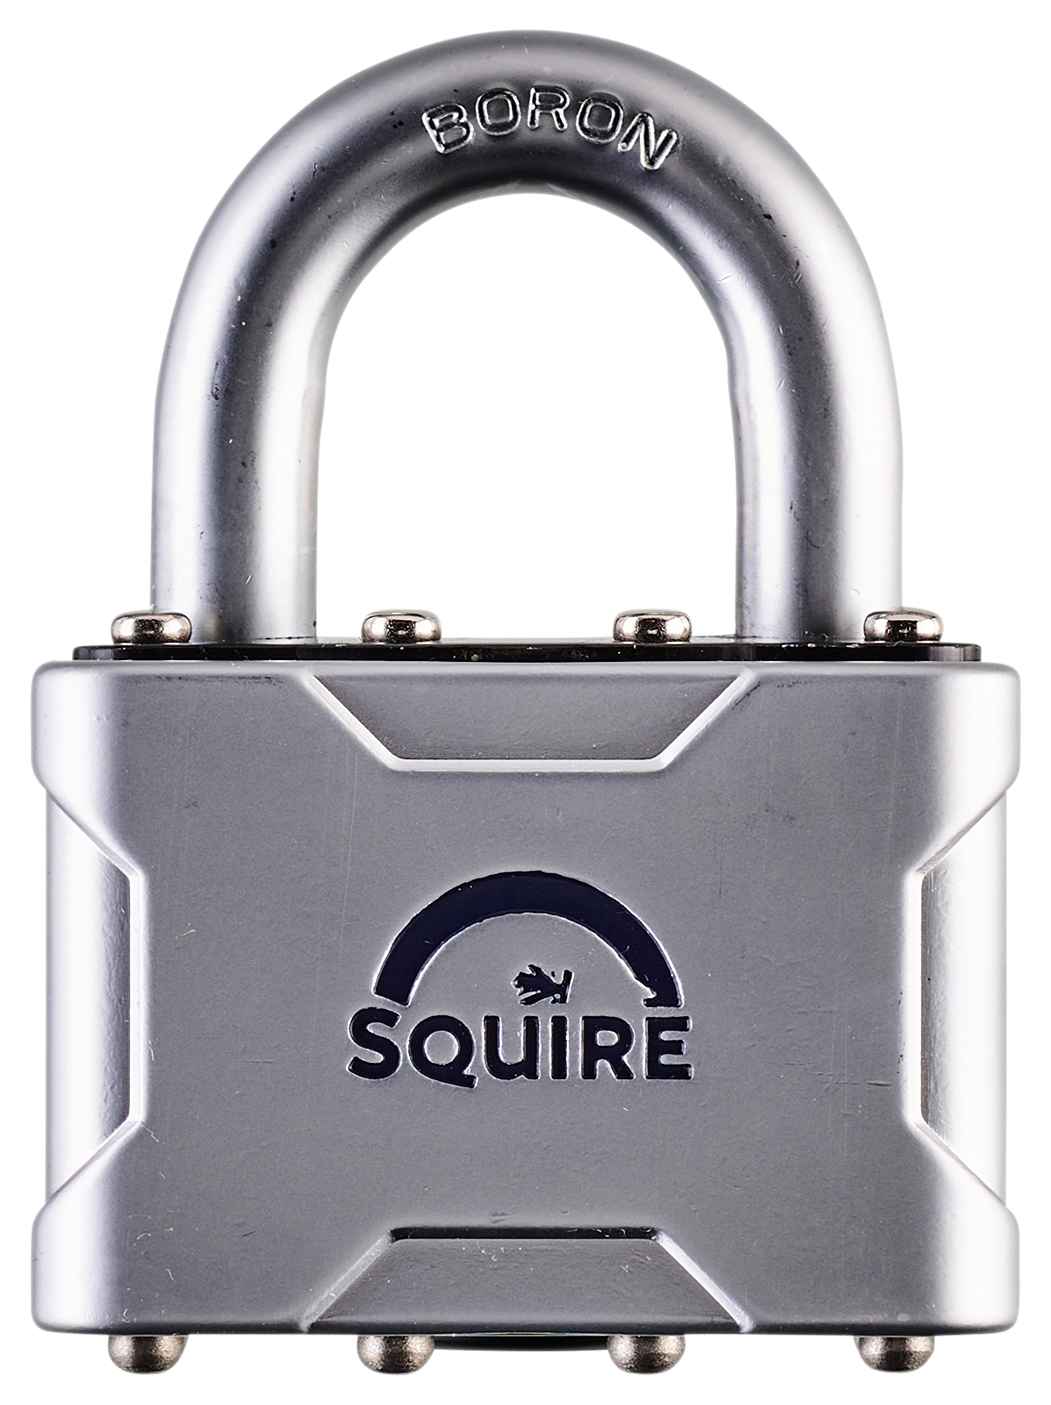 Image of Squire Die Cast Body Cover with Boron Shackle Padlock - 50mm